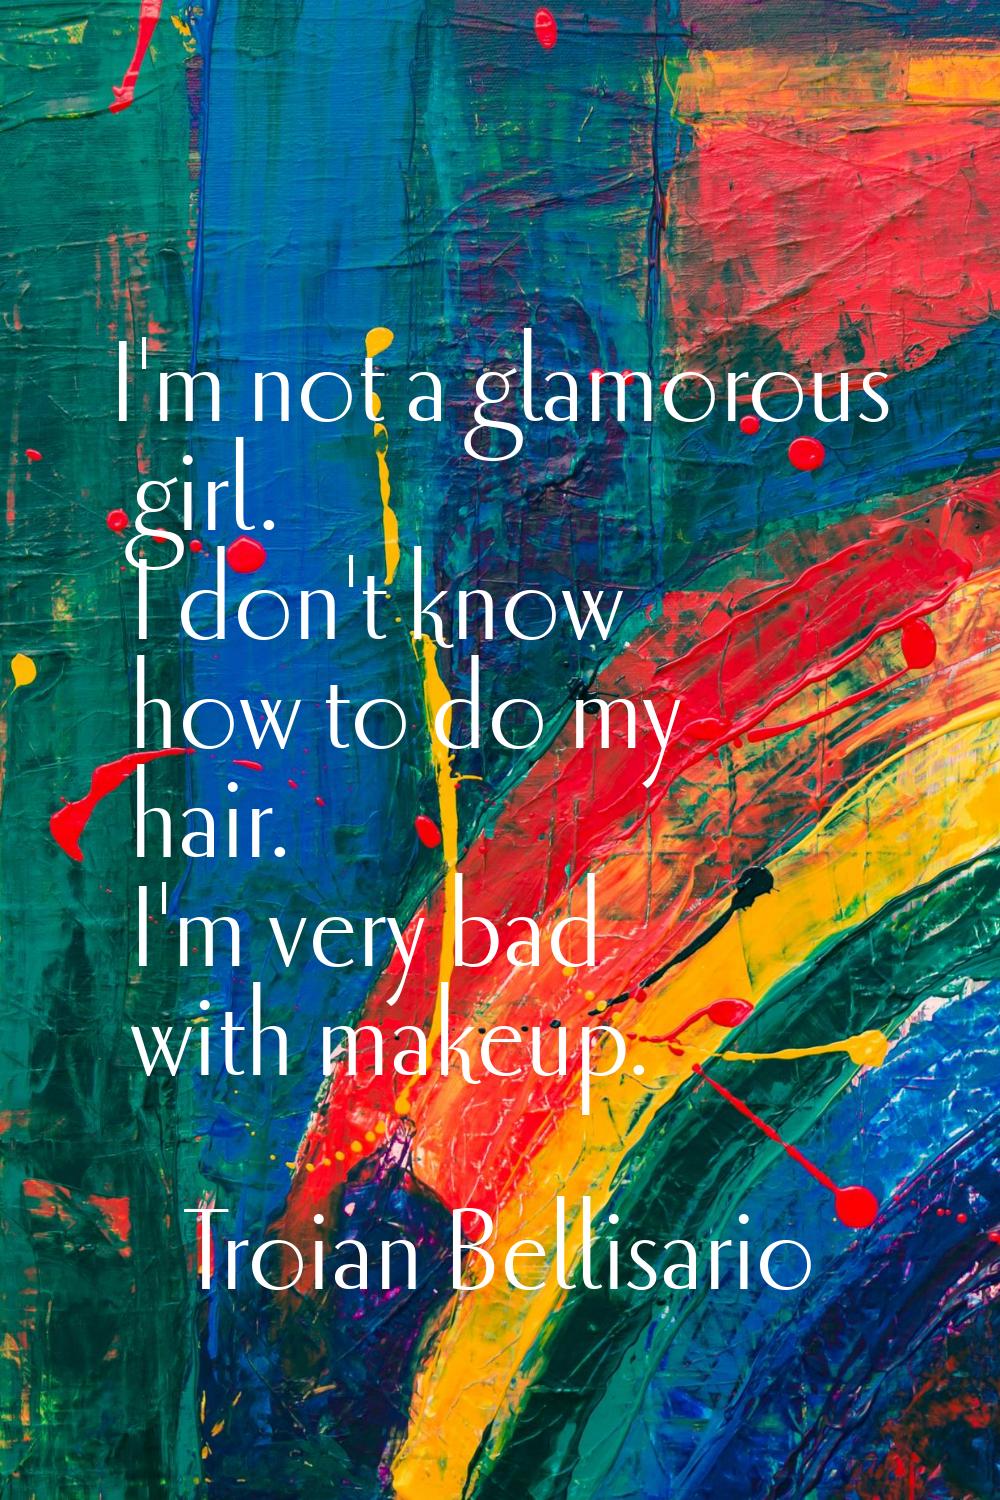 I'm not a glamorous girl. I don't know how to do my hair. I'm very bad with makeup.